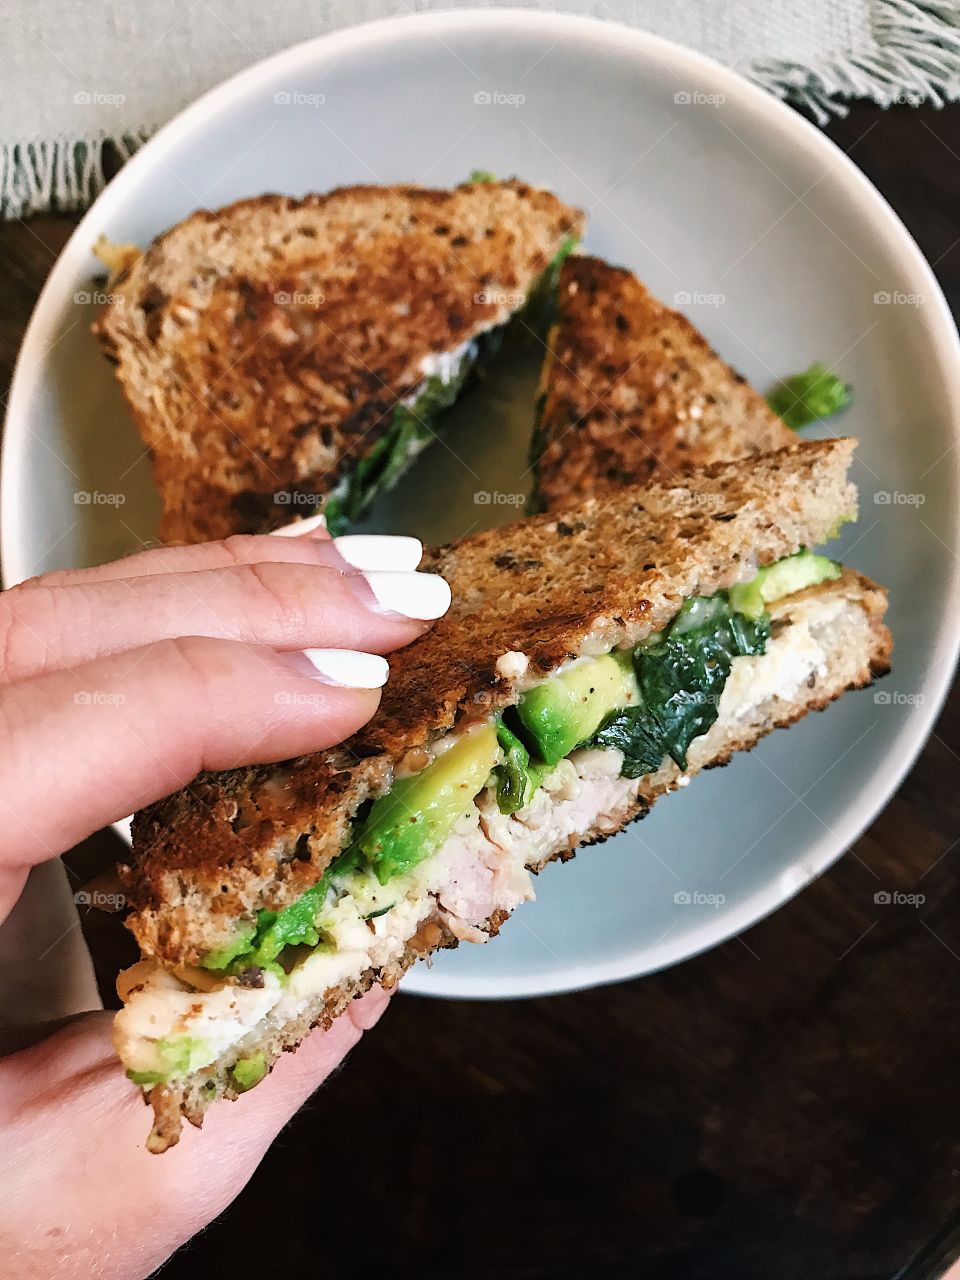 Savory and delicious turkey avocado panini with spinach and melted Swiss!